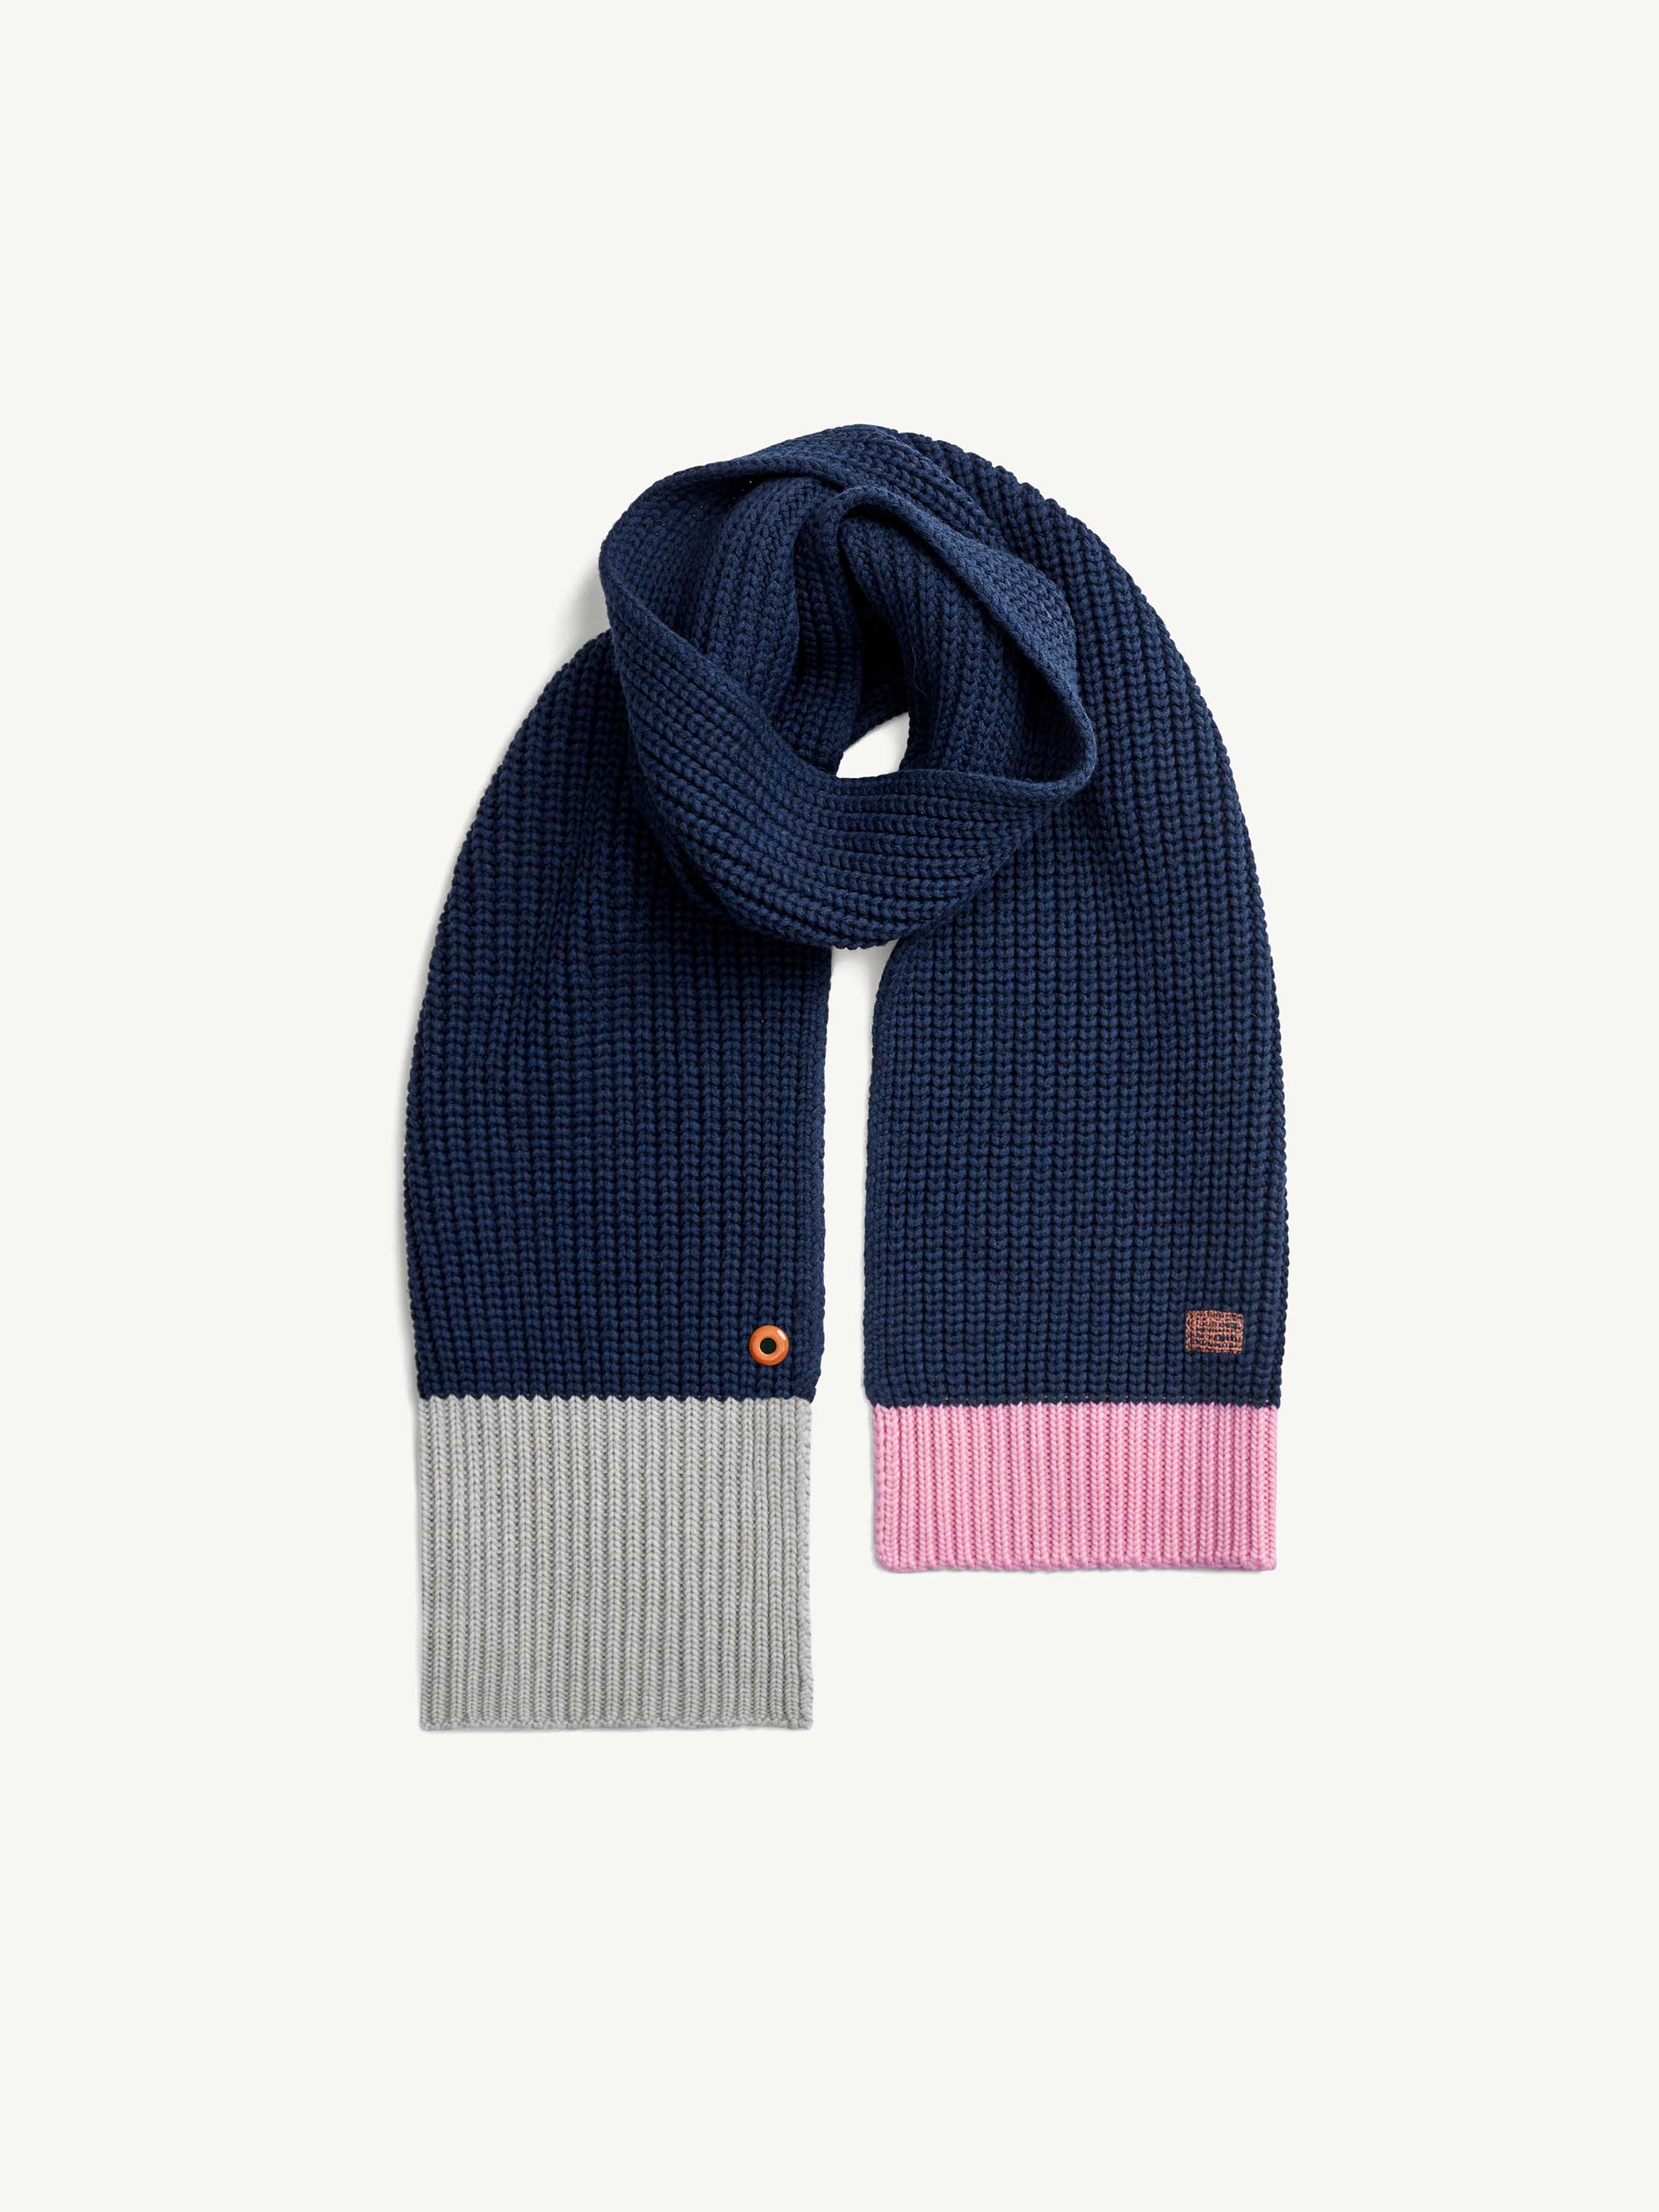 Scarves & Hats Archives - The Sustainable Studio